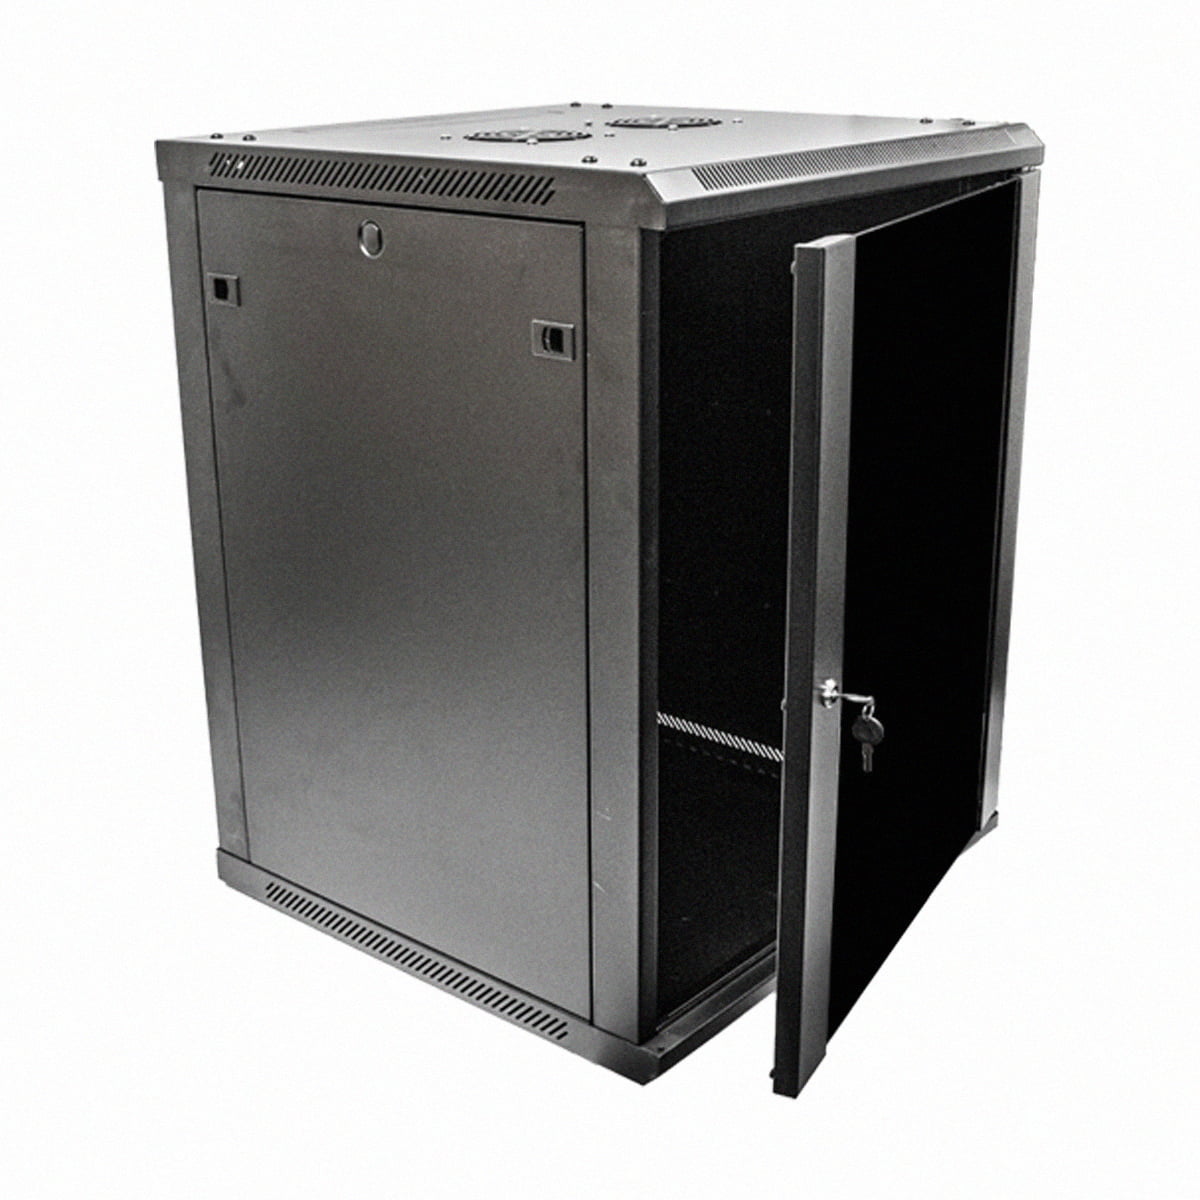 16-inch Dark Black with Glass Door Fully Assembled 6U Professional Wall-Mounted Network Server Cabinet chassis-19-inch Server Network Rack with Optional casters 